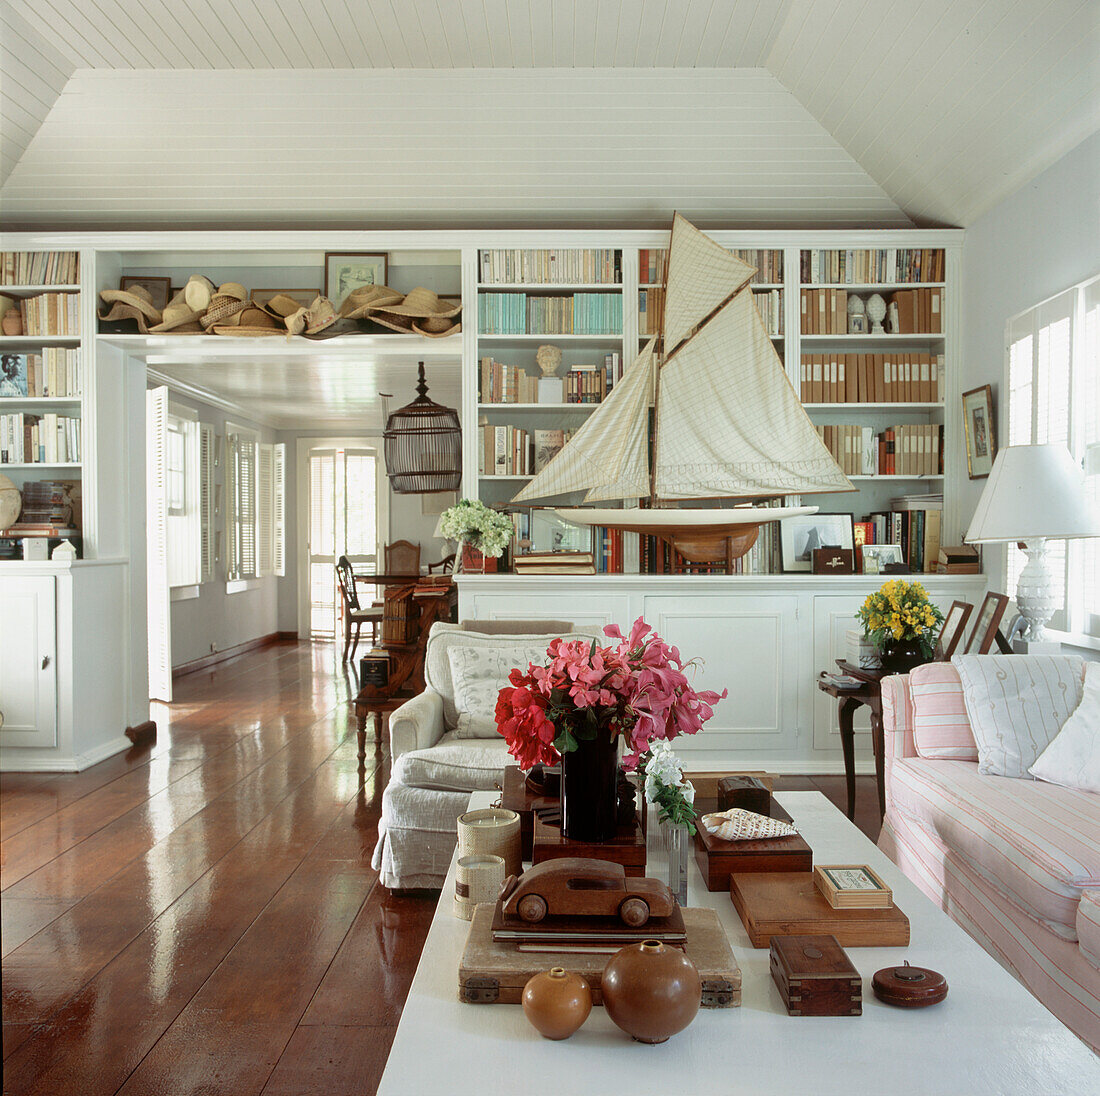 Open plan living dining room with built in bookshelves and cupboards displaying straw hats and a model sailing boat amongst other collectibles